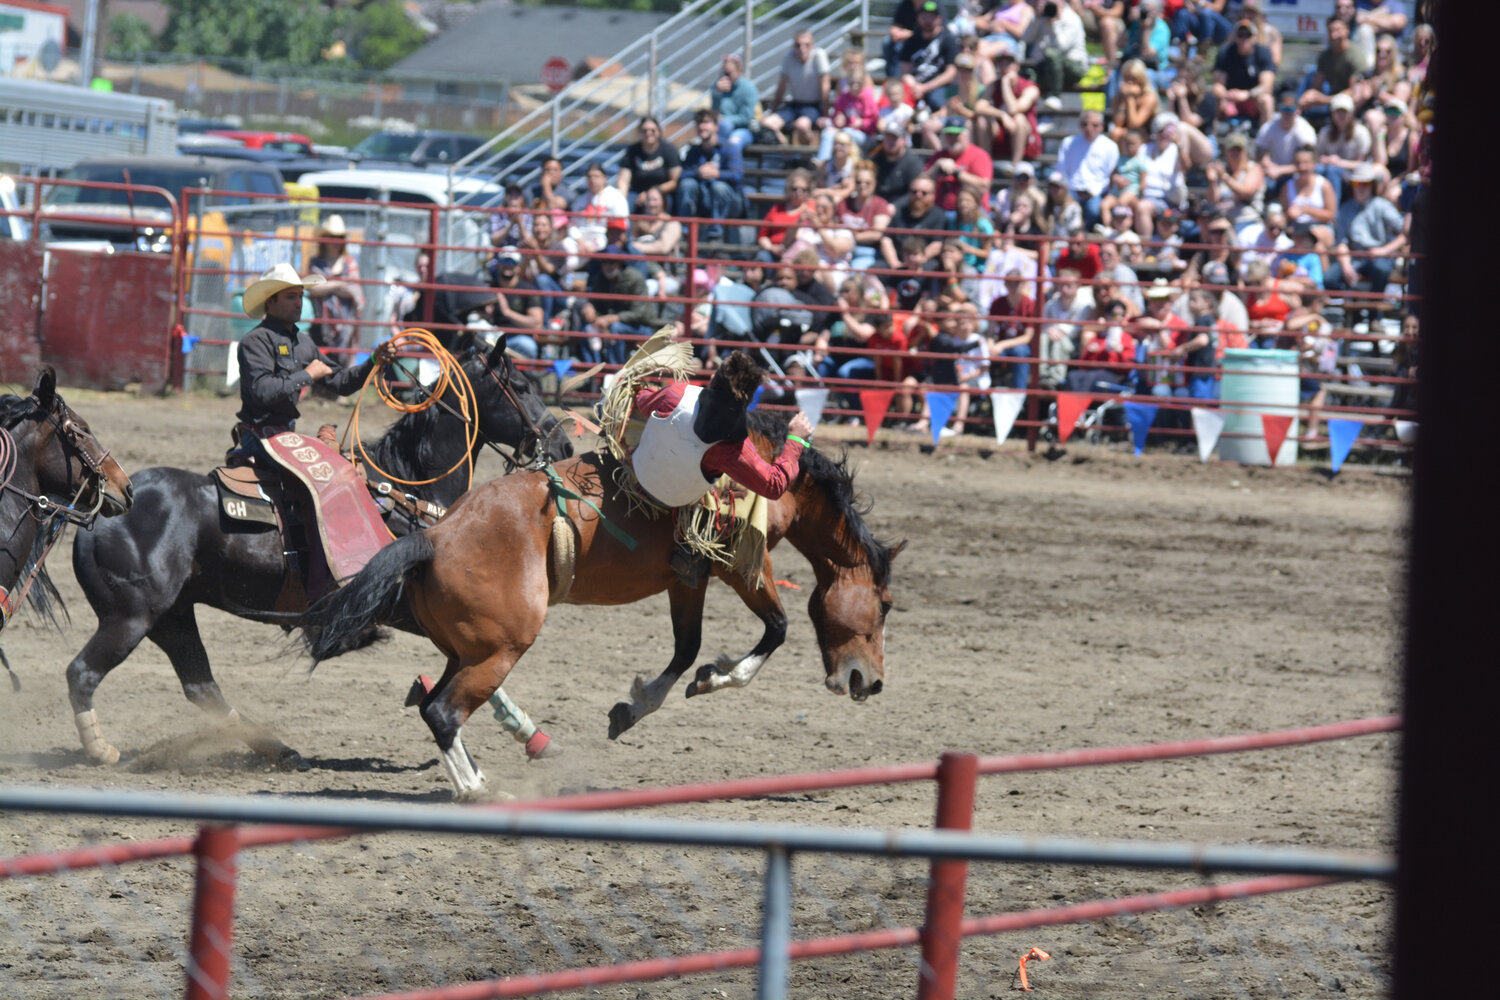 A cowboy attempts to straighten himself on the saddle as spectators watch on during the Roy Pioneer Rodeo on Sunday, June 4.